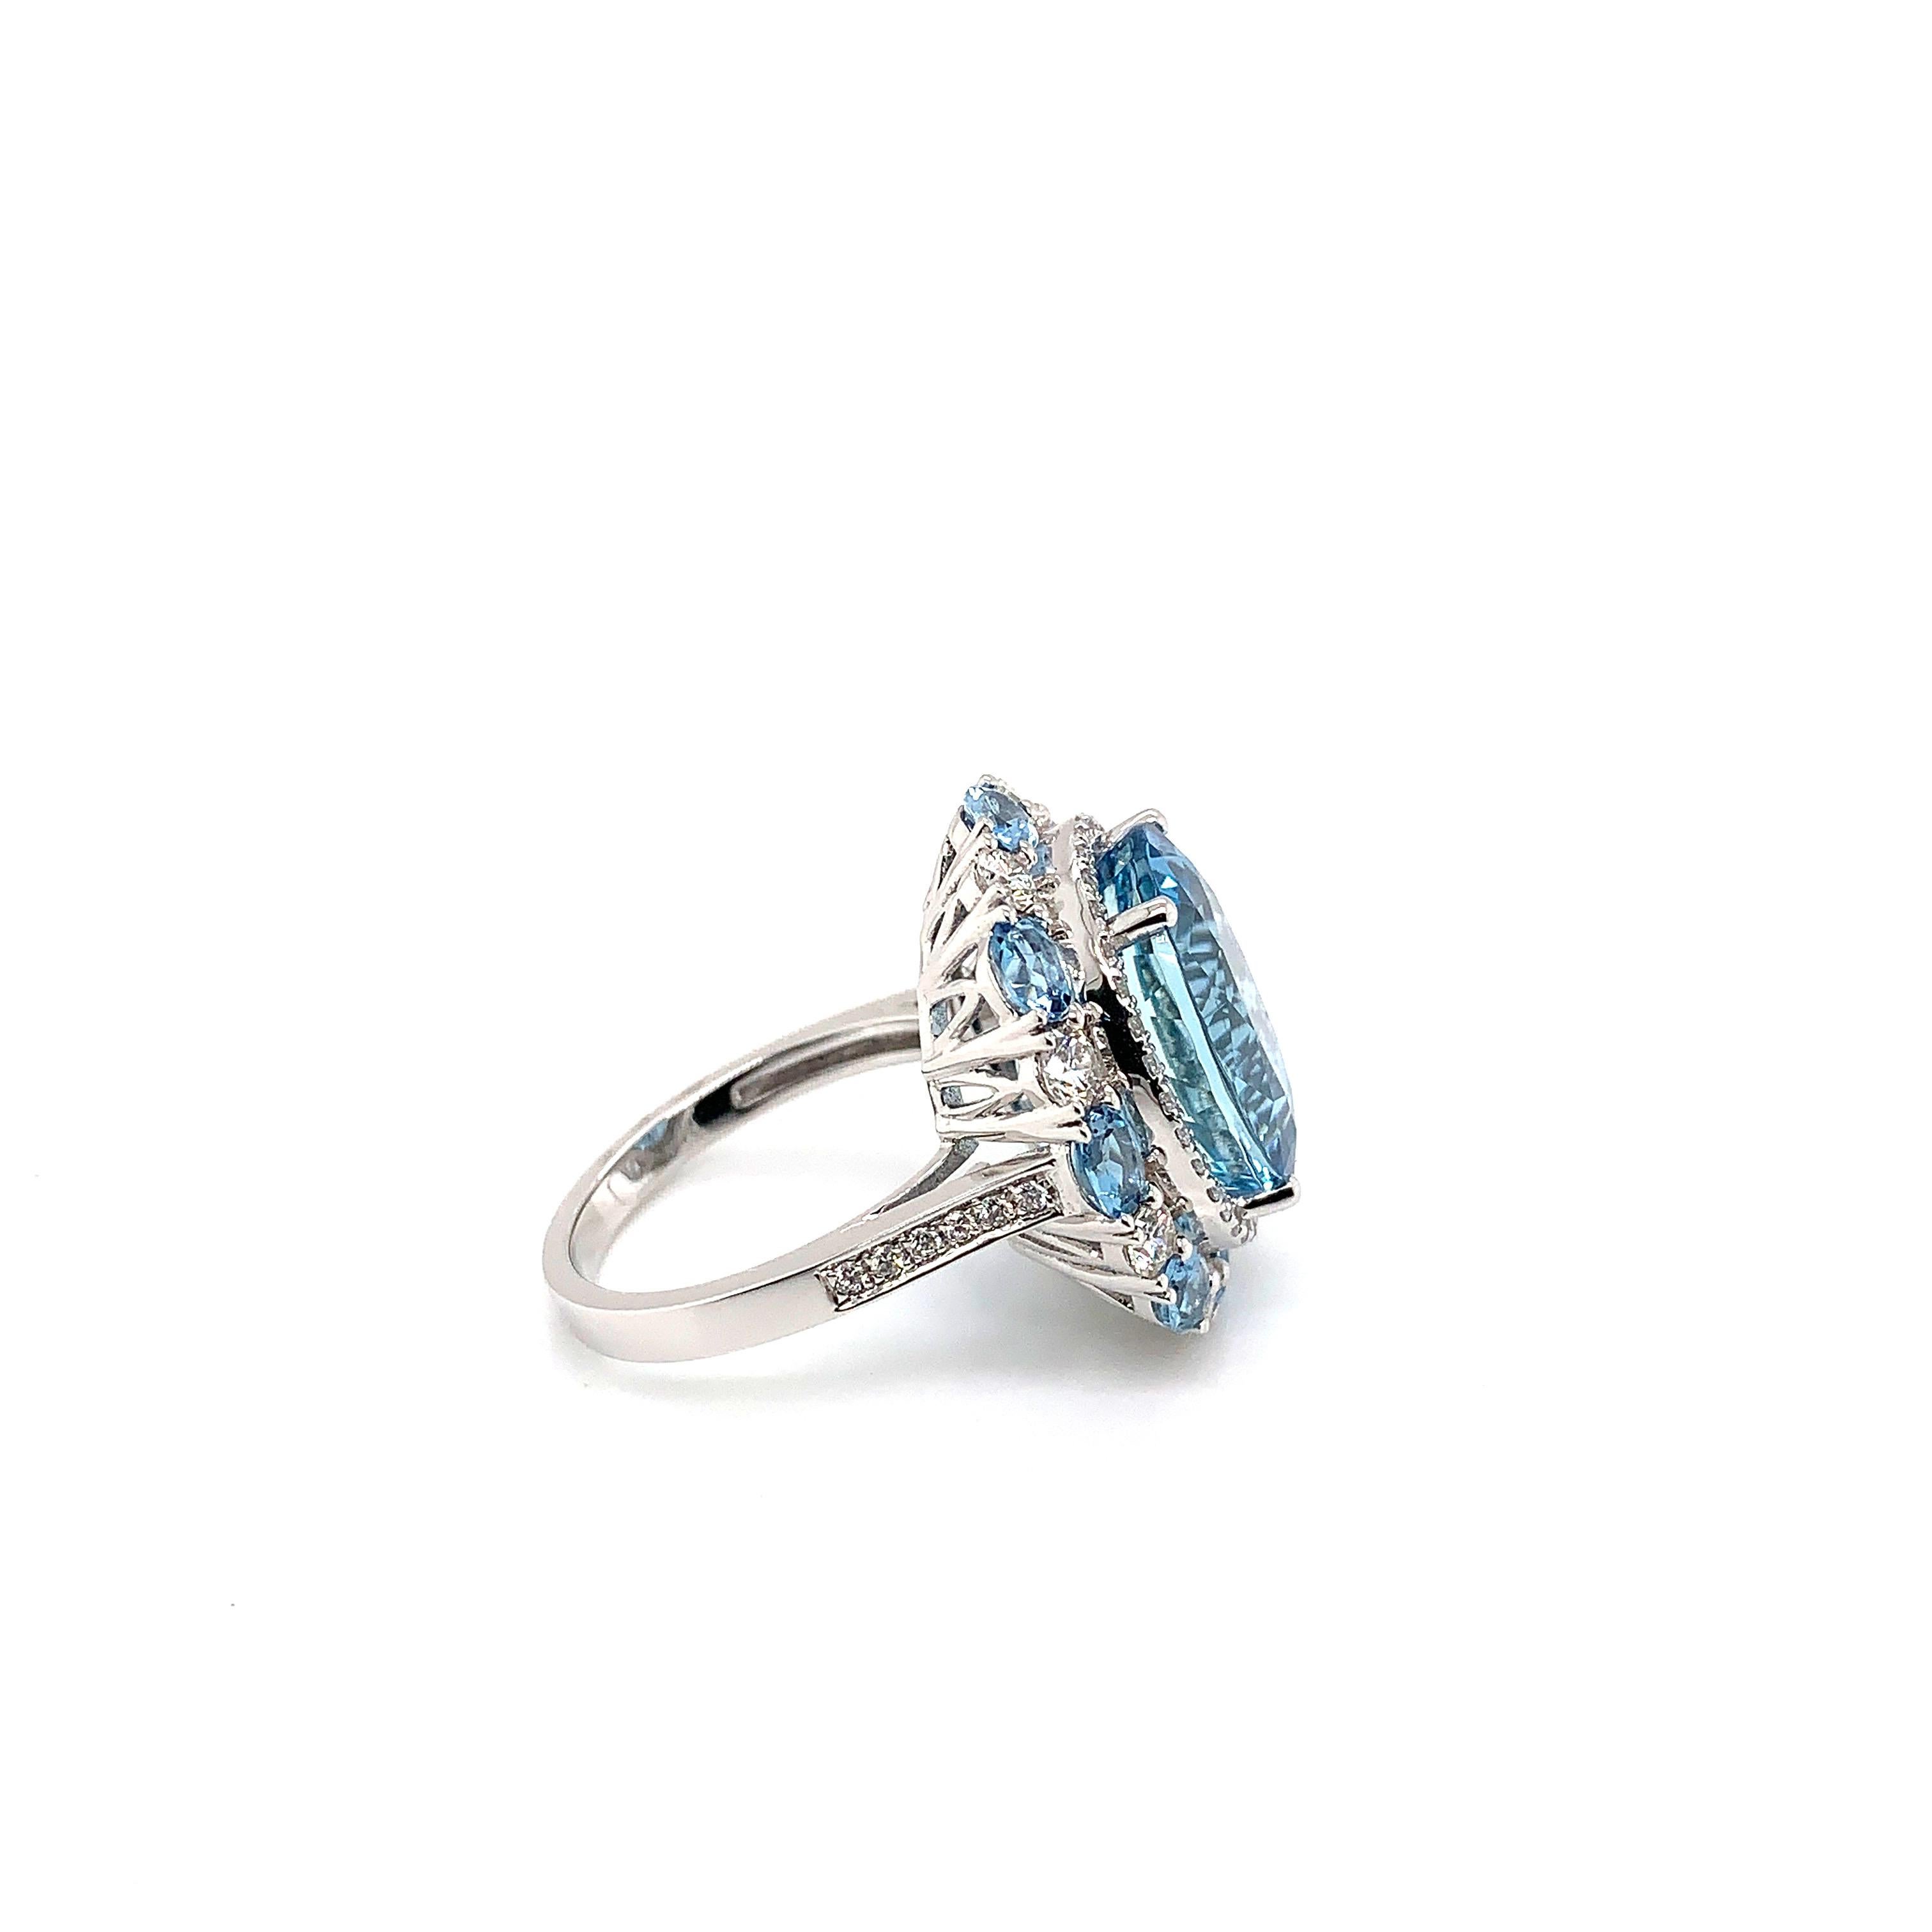 Oval Cut 9.34 Carat Oval Shaped Aquamarine Ring in 18 Karat White Gold with Diamonds